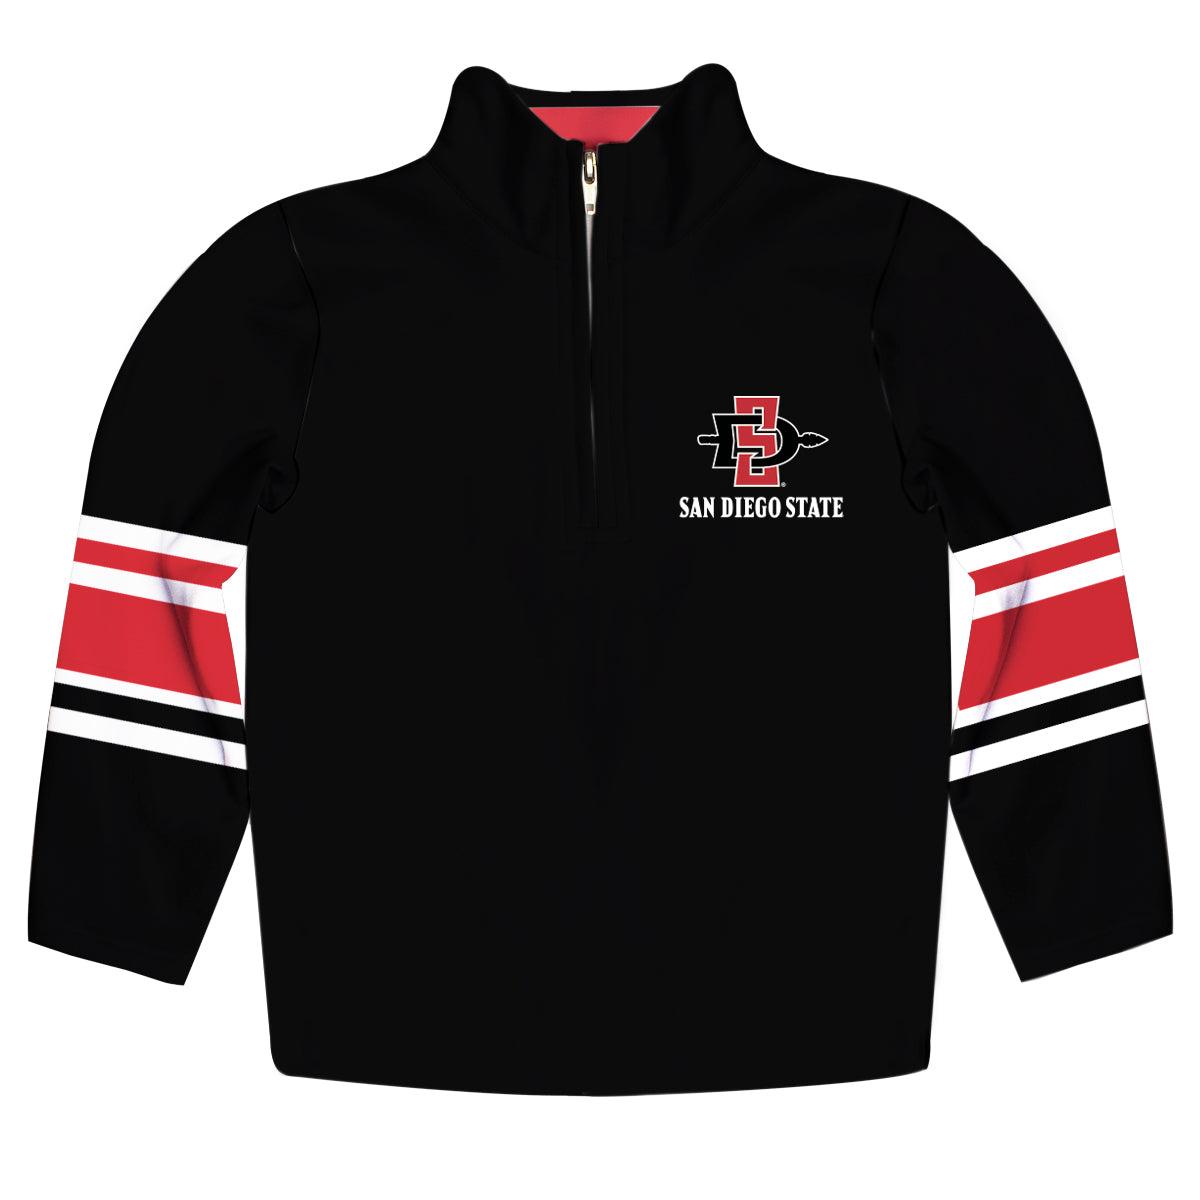 San Diego State Aztecs SDSU Game Day Black Quarter Zip Pullover for Infants Toddlers by Vive La Fete